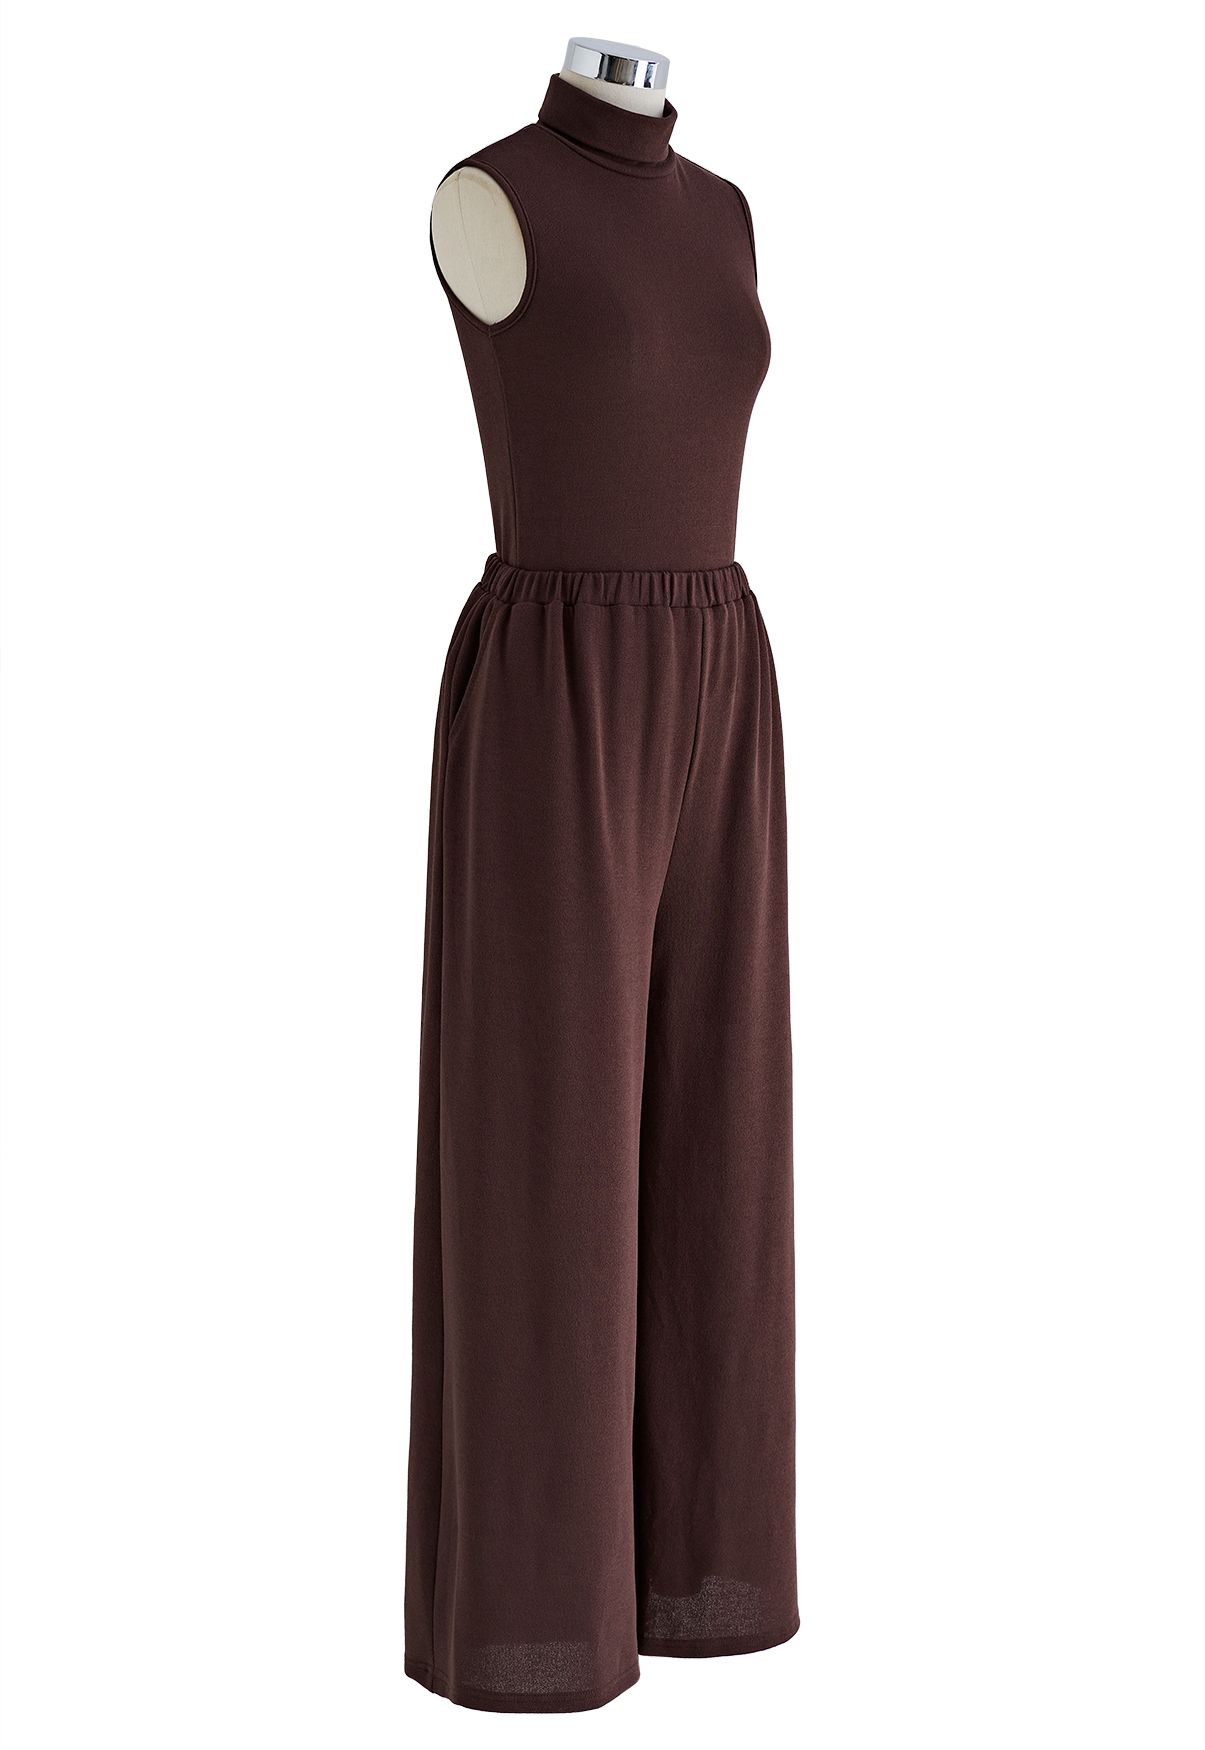 High Neck Sleeveless Top and Pants Set in Burgundy